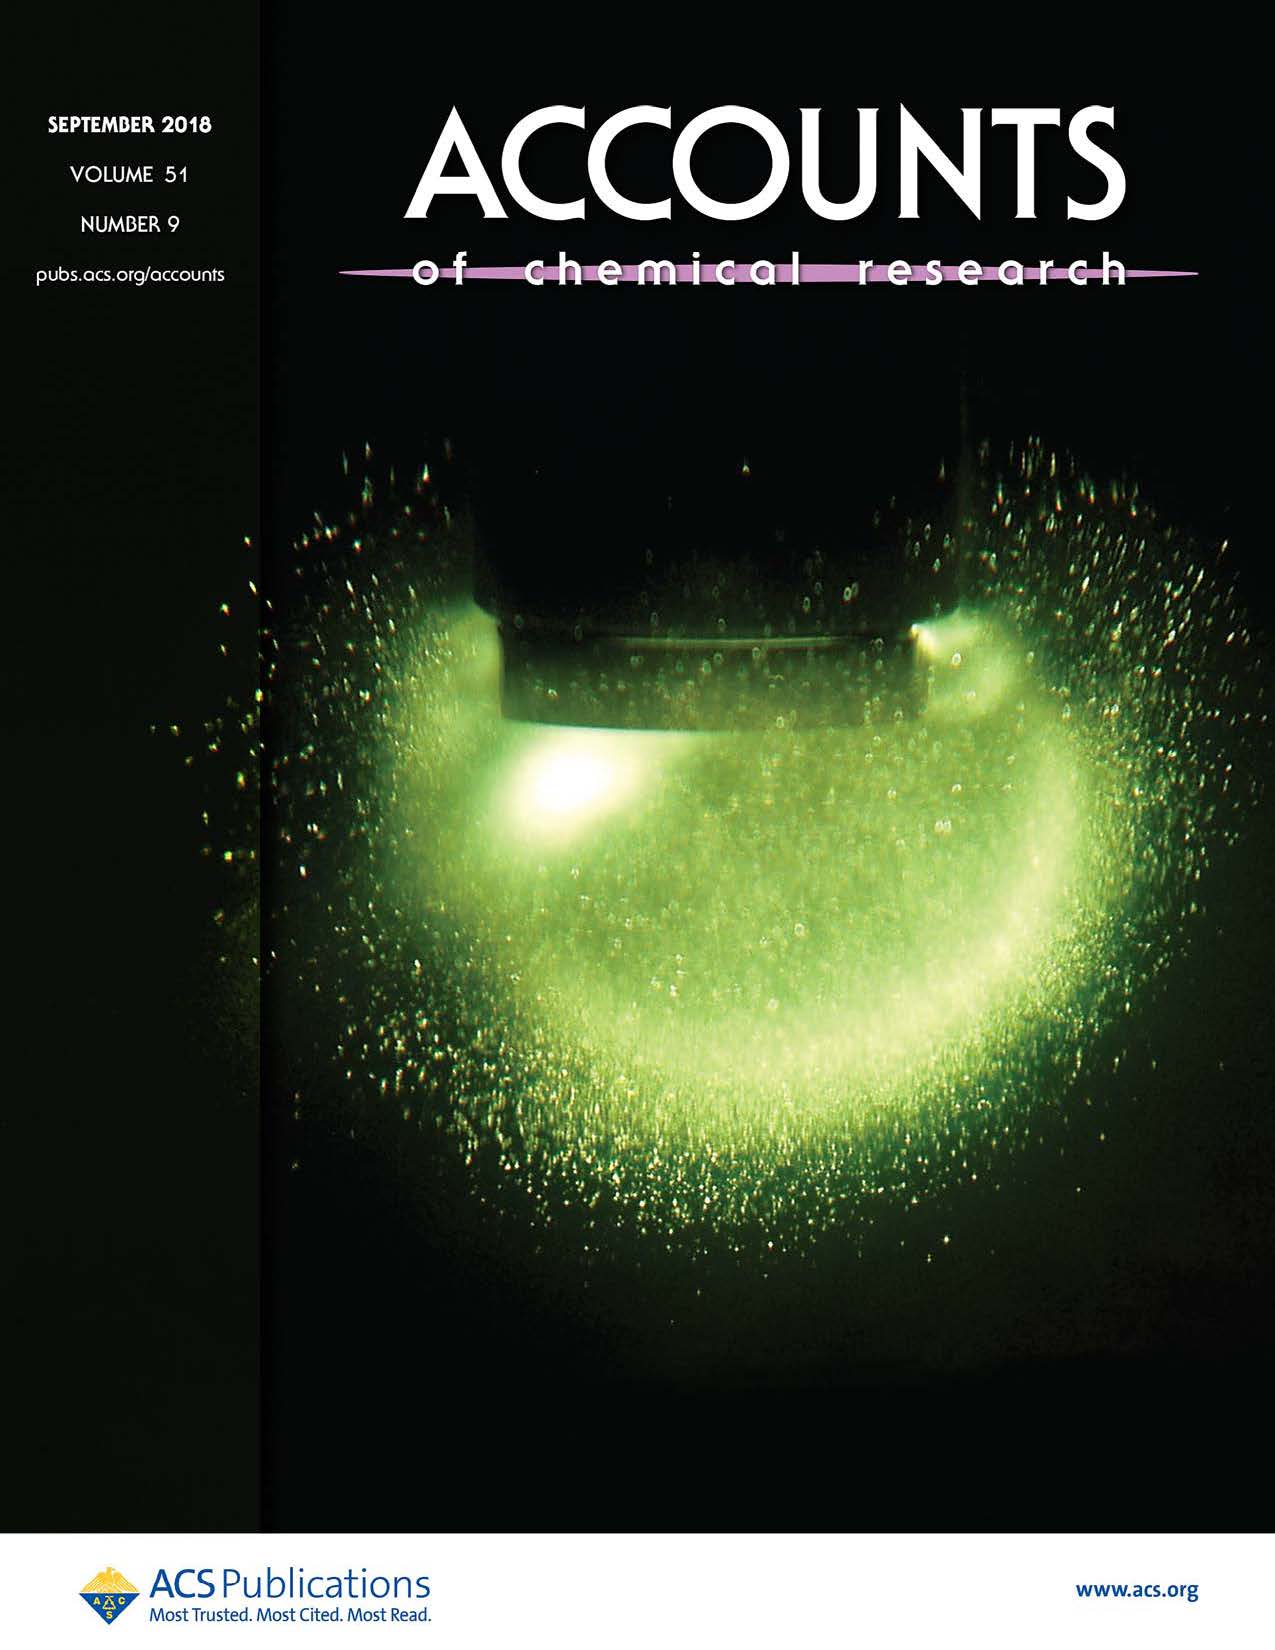 Accounts Cover 2018